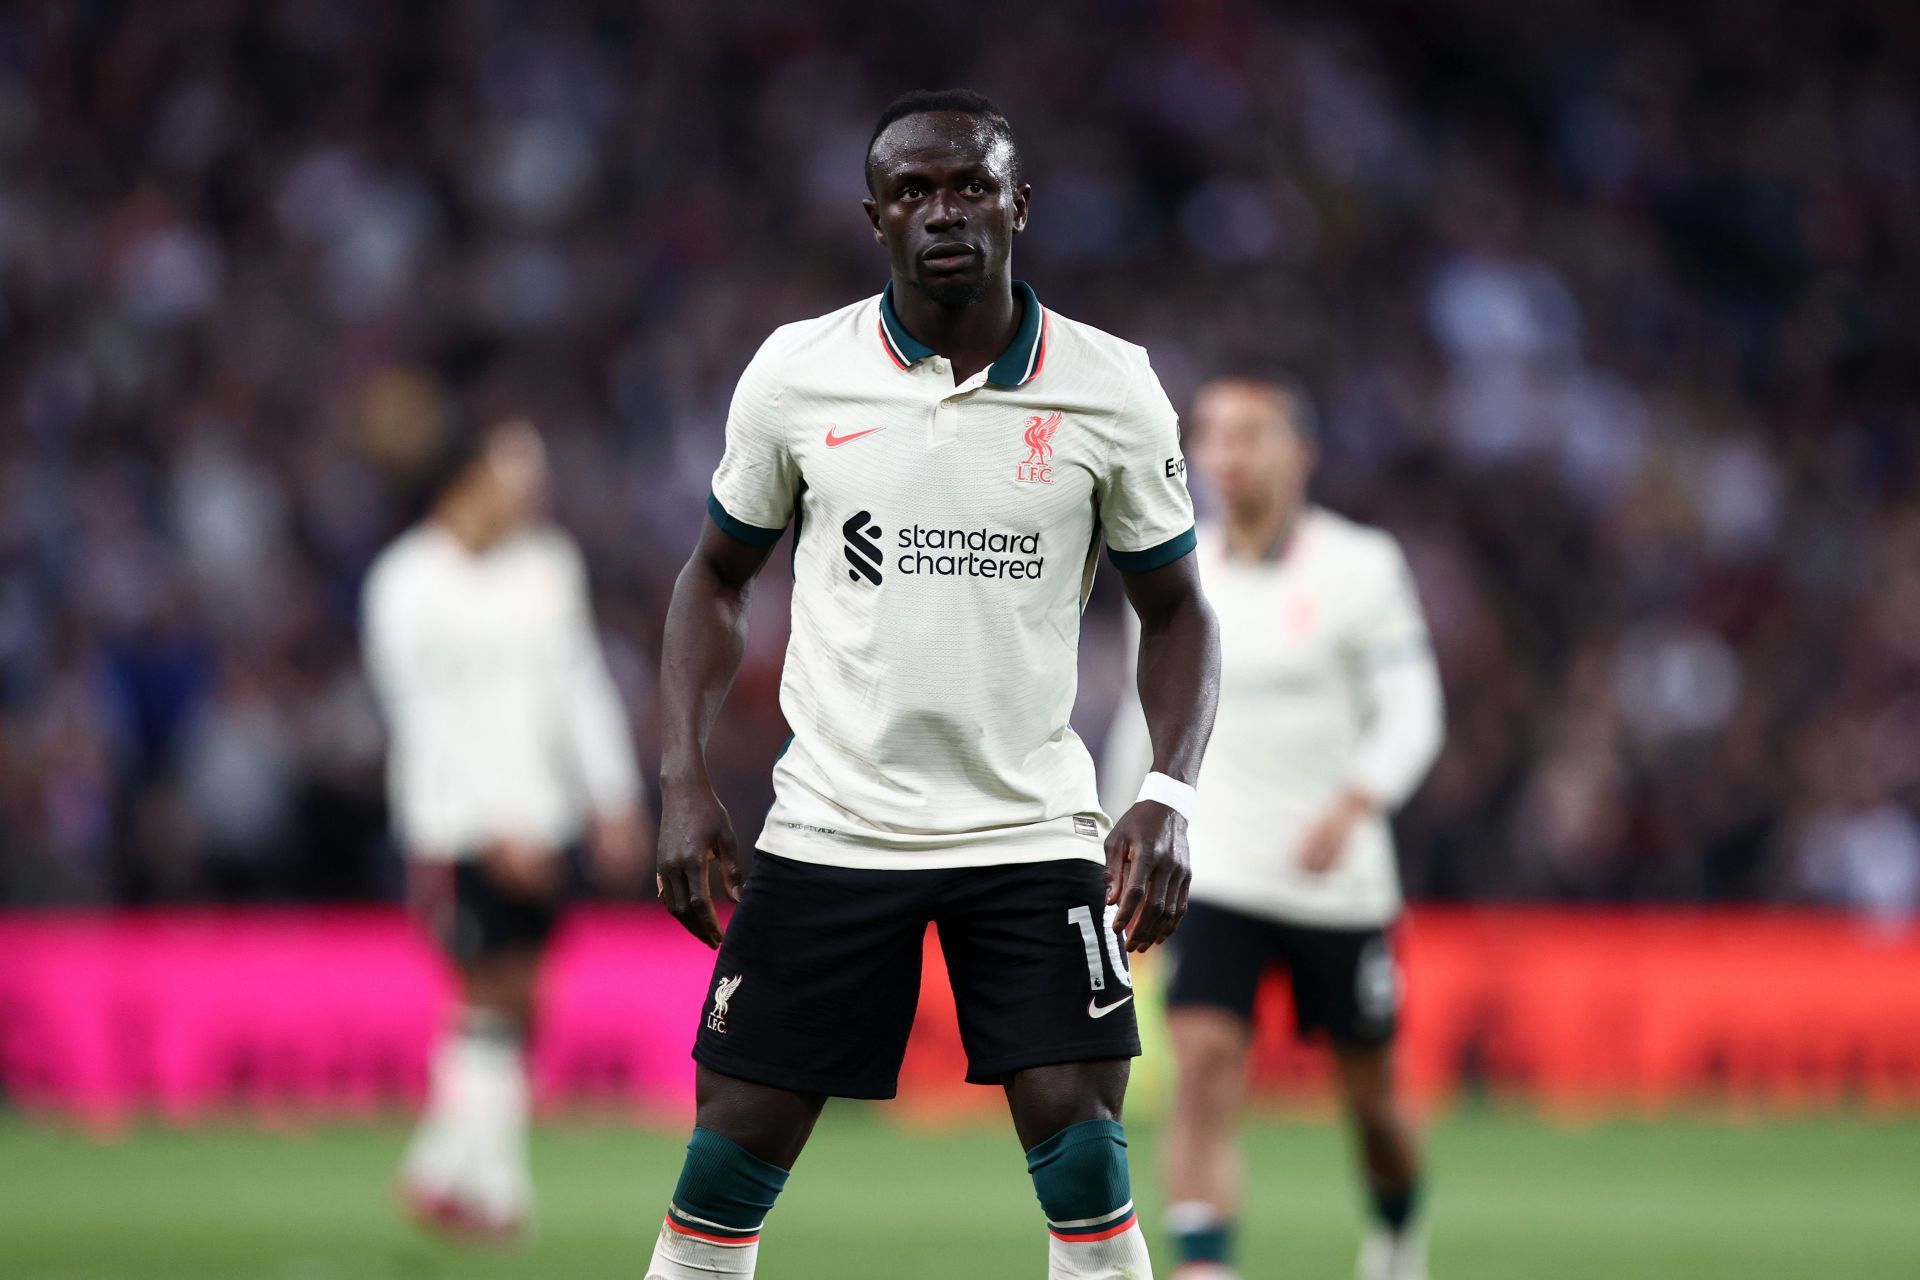 Sadio Mane has been an integral part of the club ever since his arrival